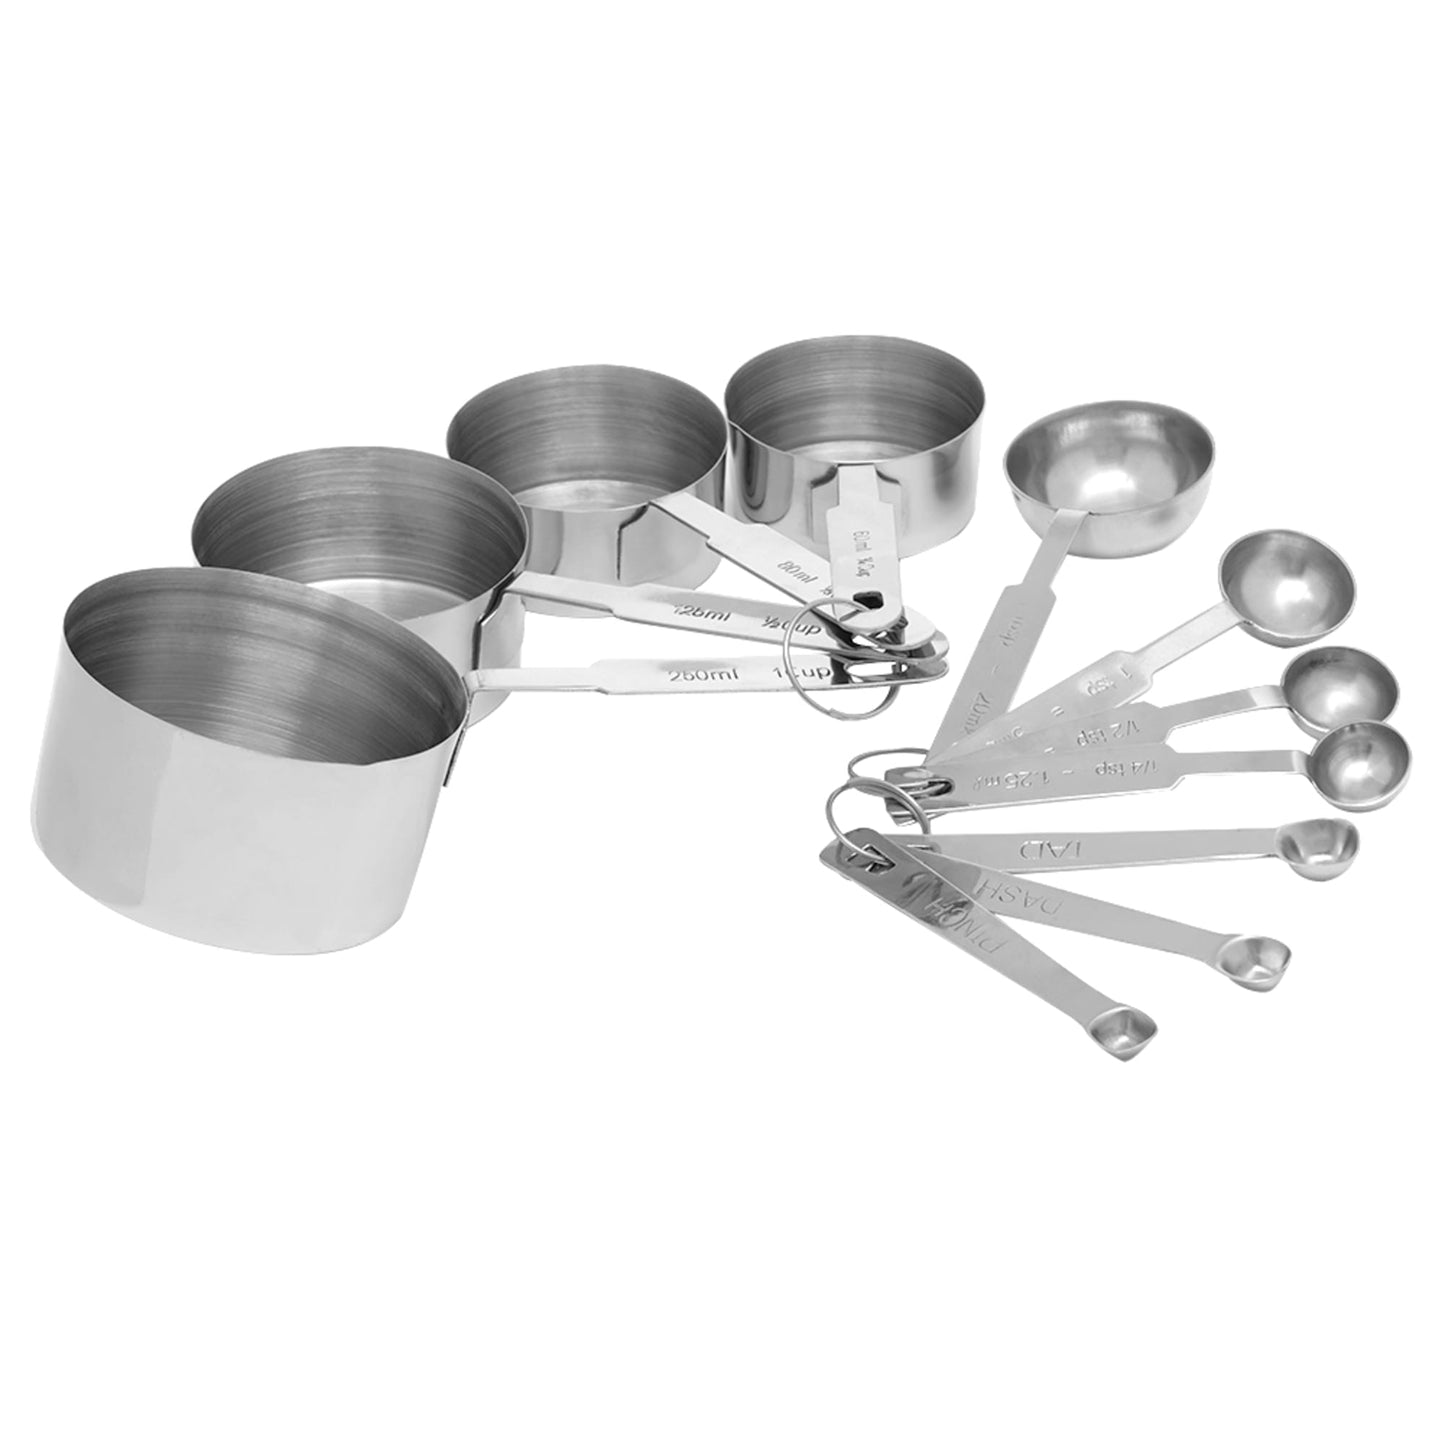 Measuring Spoons, Stainless Steel 4-piece Measuring Spoon Cups Set